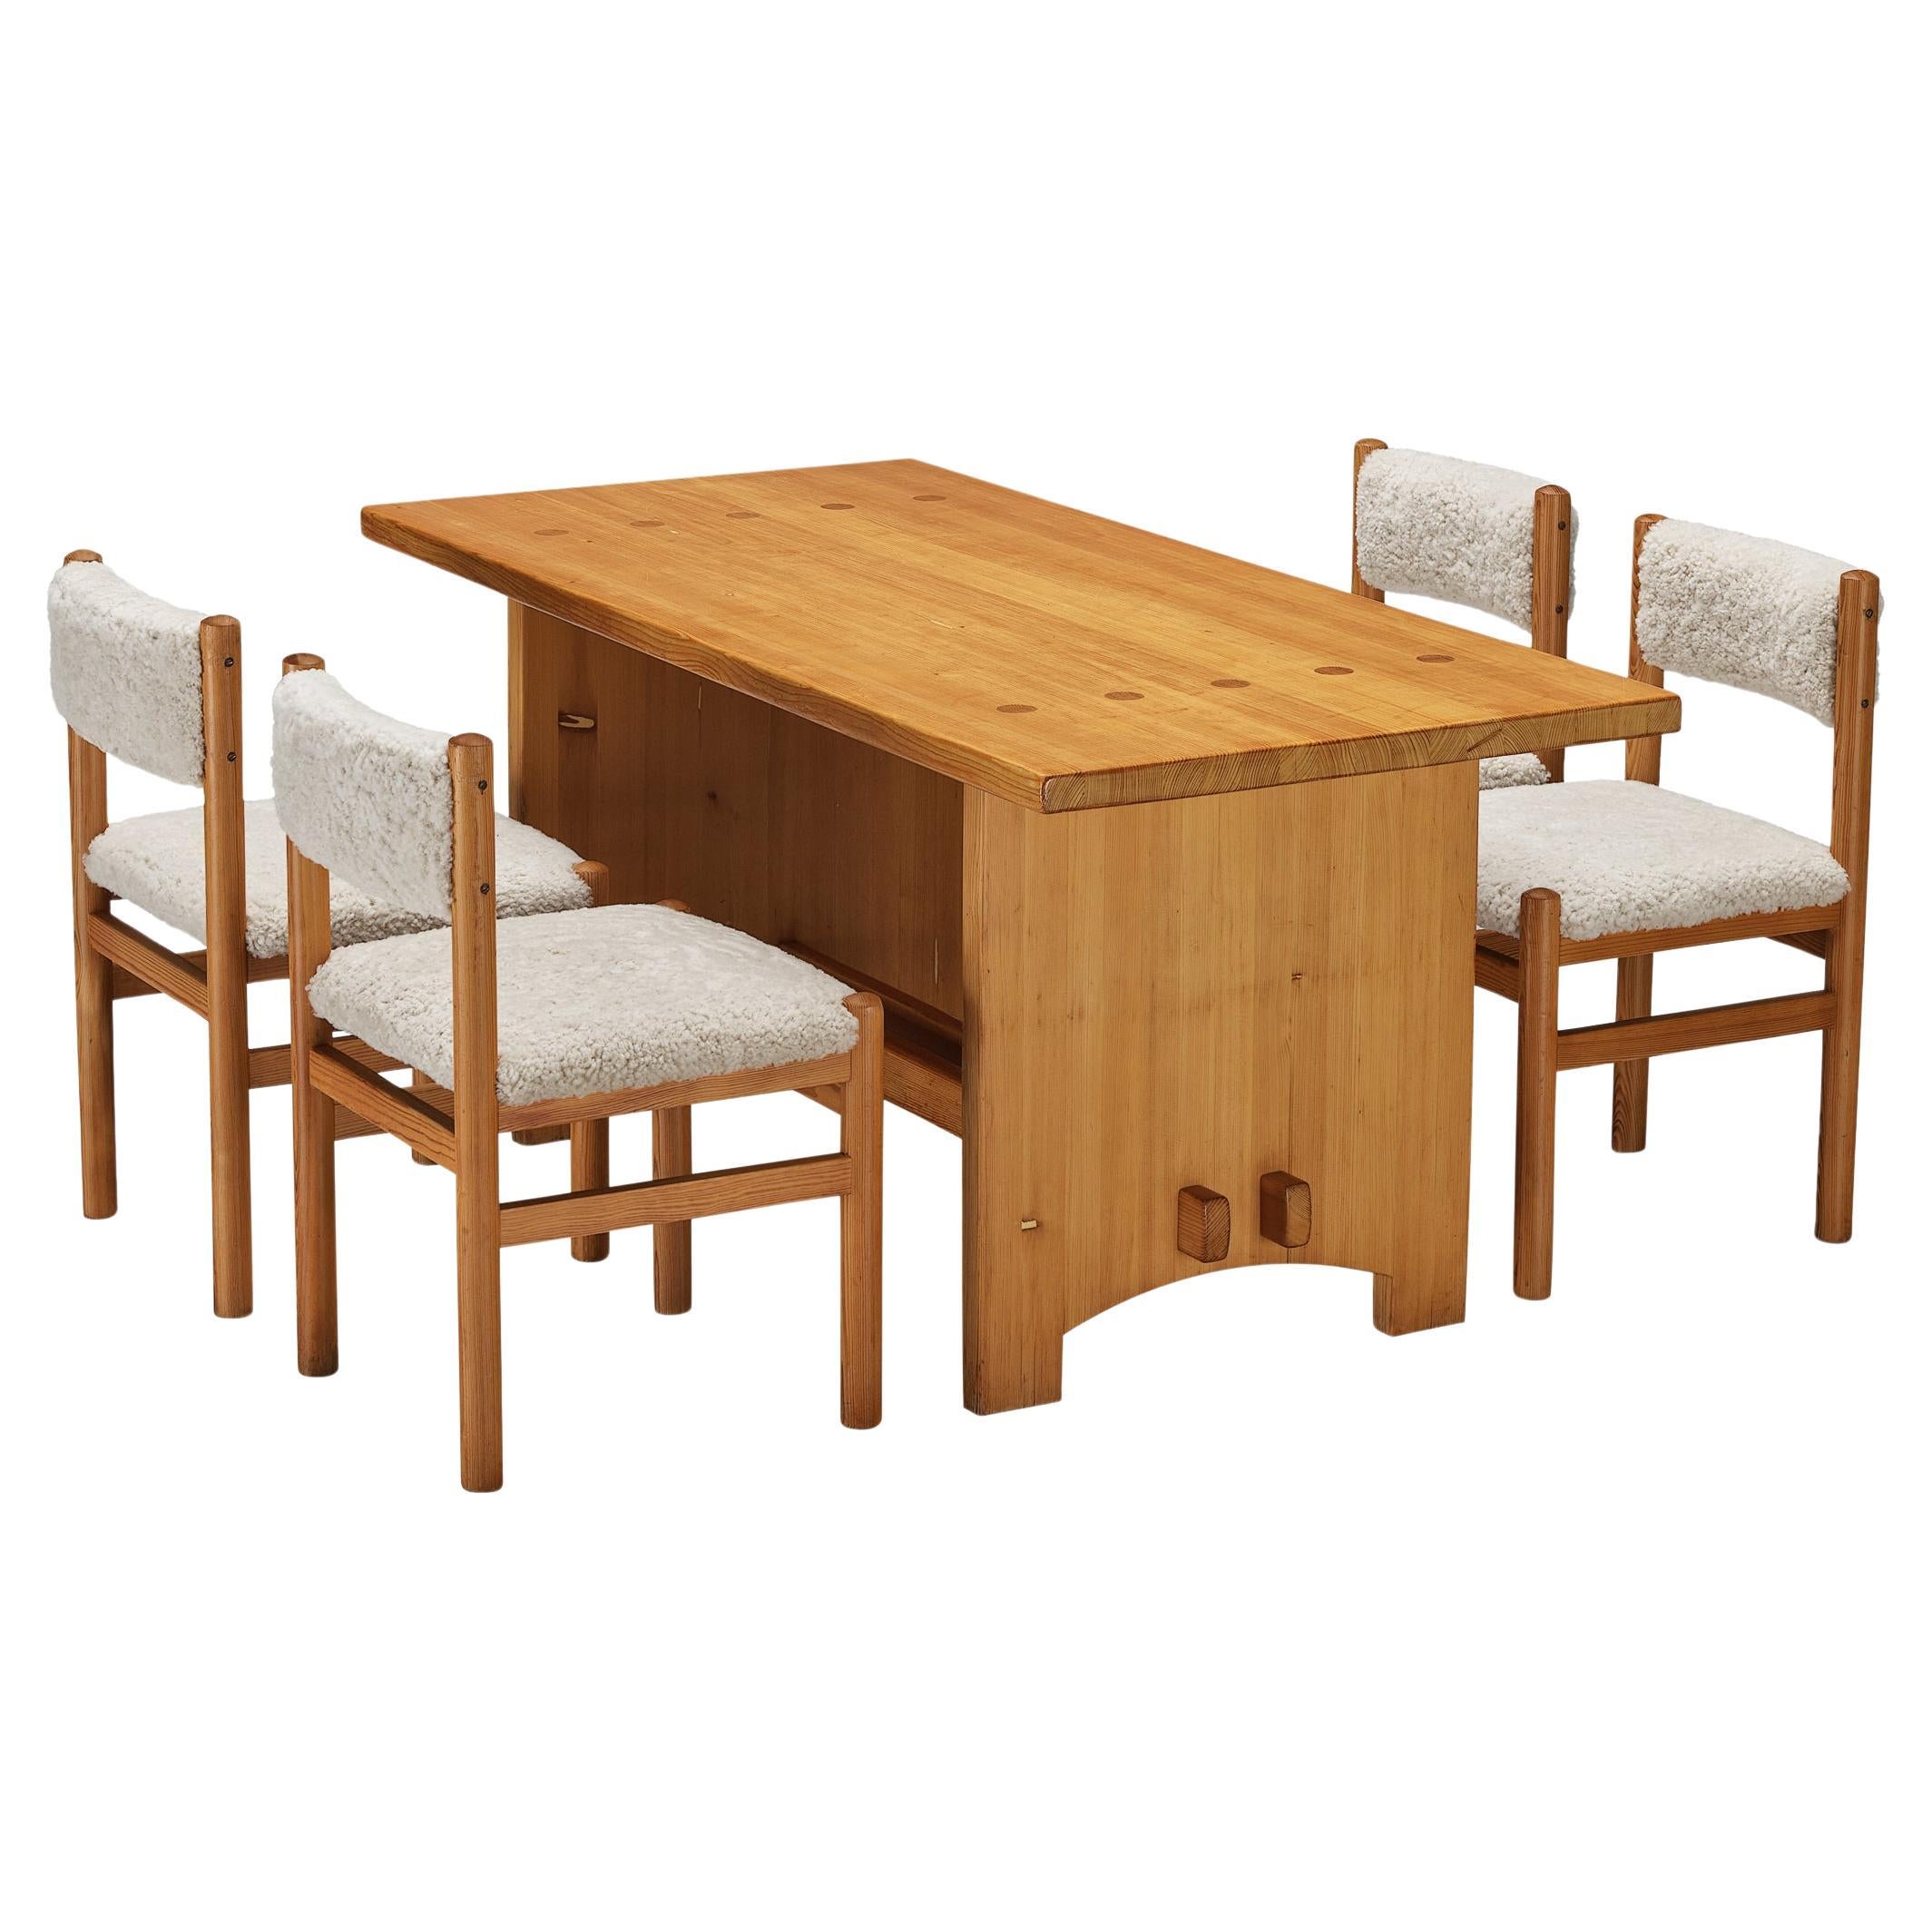 How tall is the typical dining table?